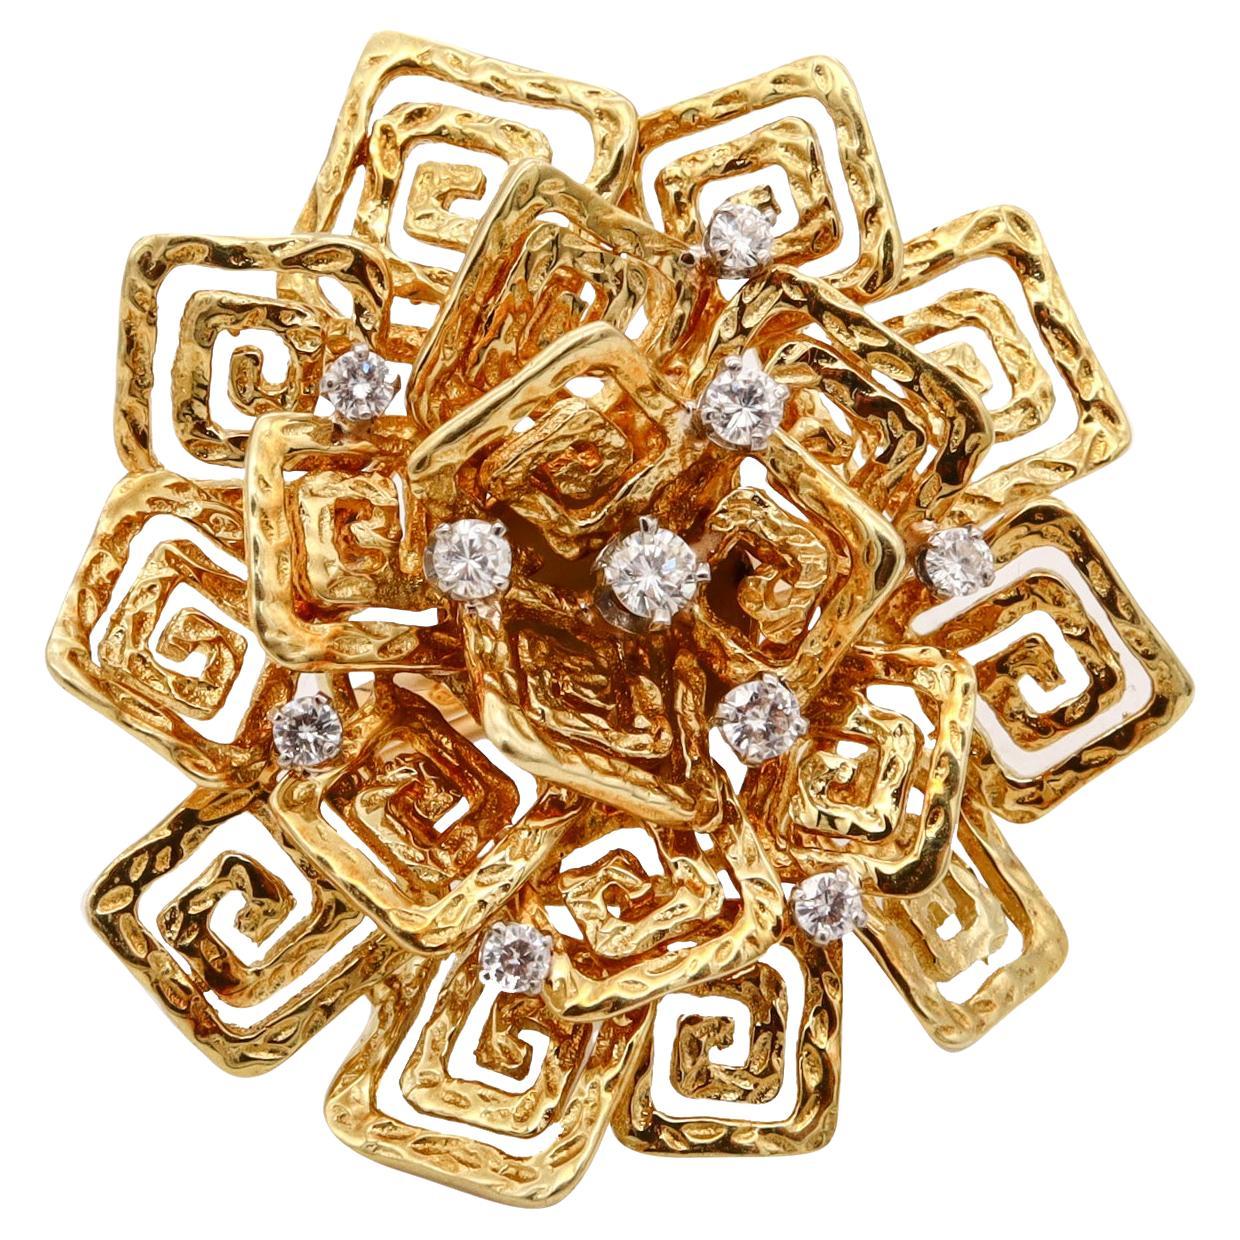 Hammerman Brothers 1960 Geometric Cocktail Ring In 18Kt Gold With VS Diamonds